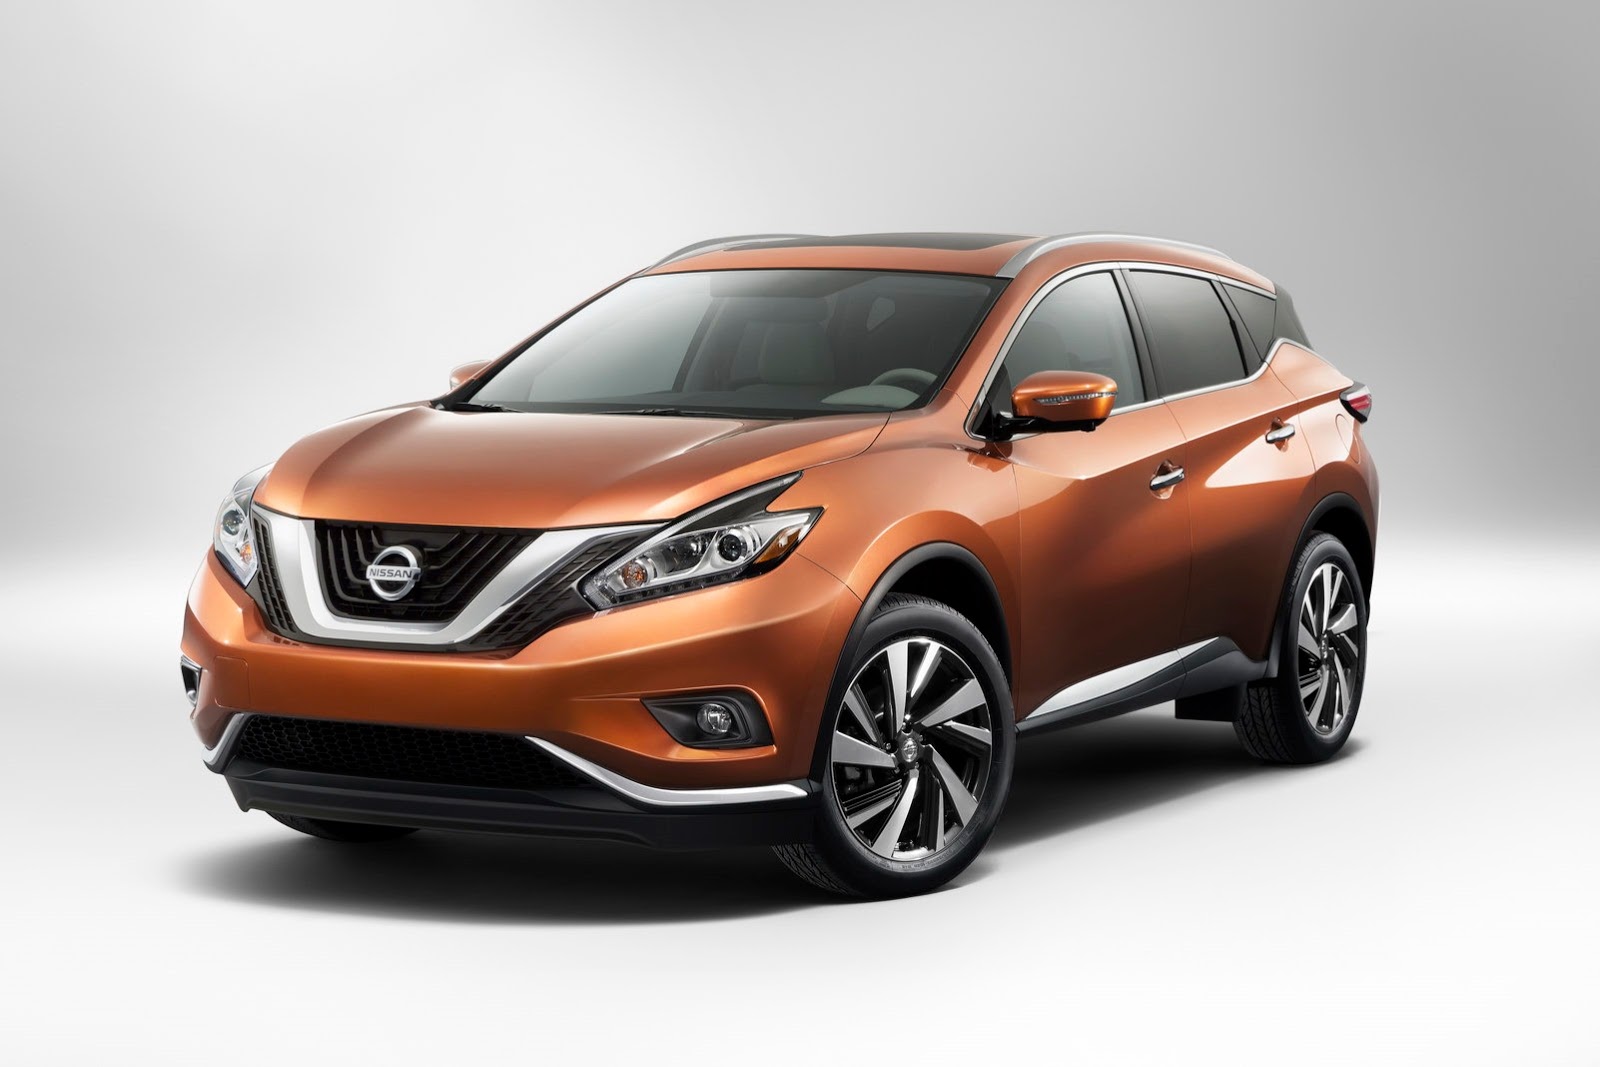 Used car buying guide Nissan Murano  Autocar